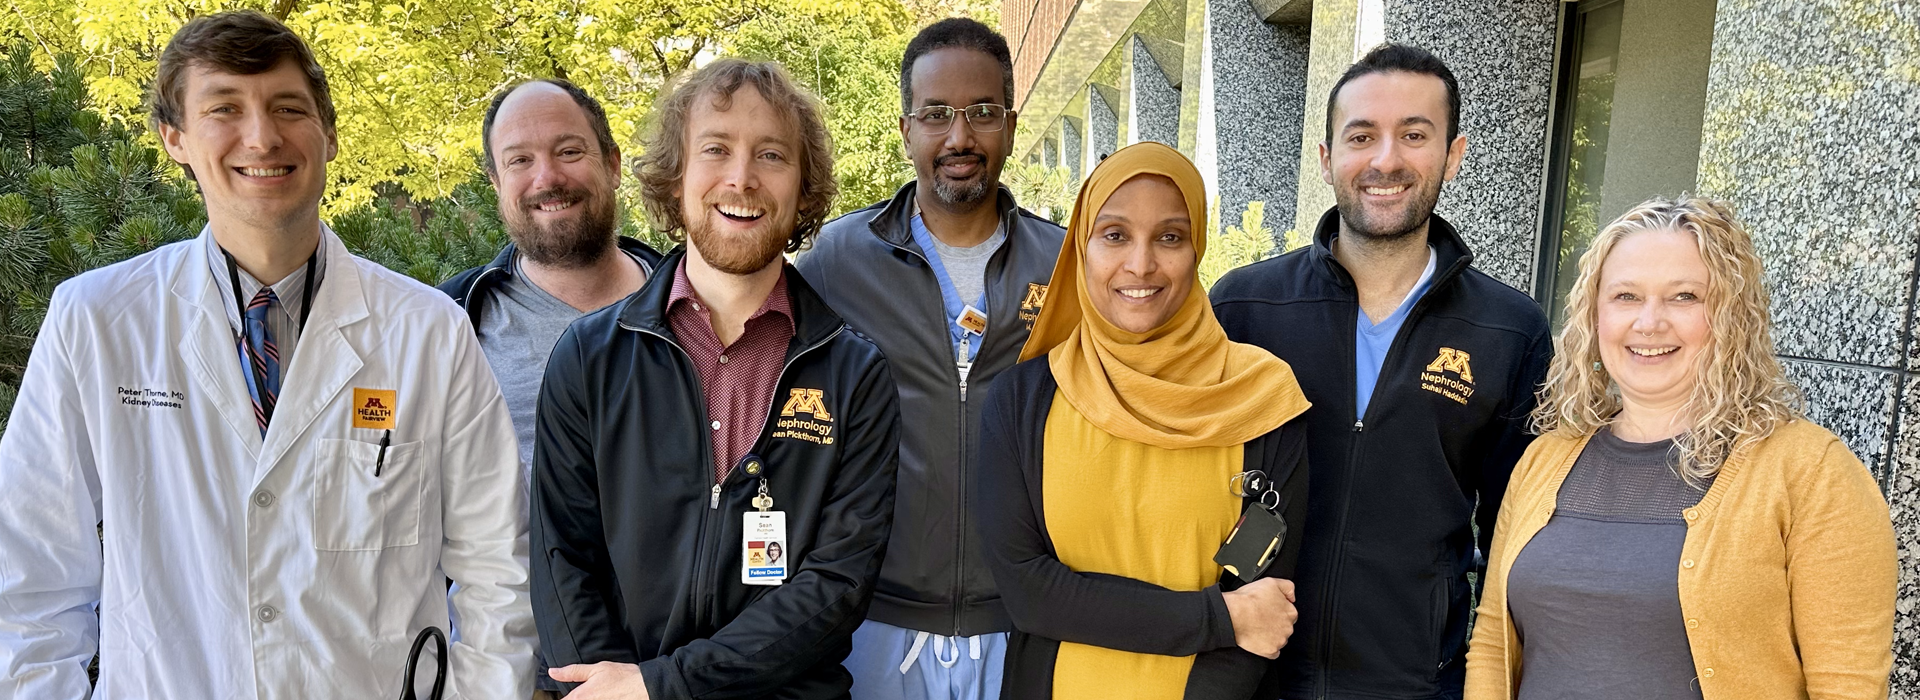 Pictured L to R:  Associate Program Director P. Thorne; Fellows A. Dayton, S. Pickthorn, M. Kassim, M. Ahmed, and S. Haddadin; and Program Director S. Elfering